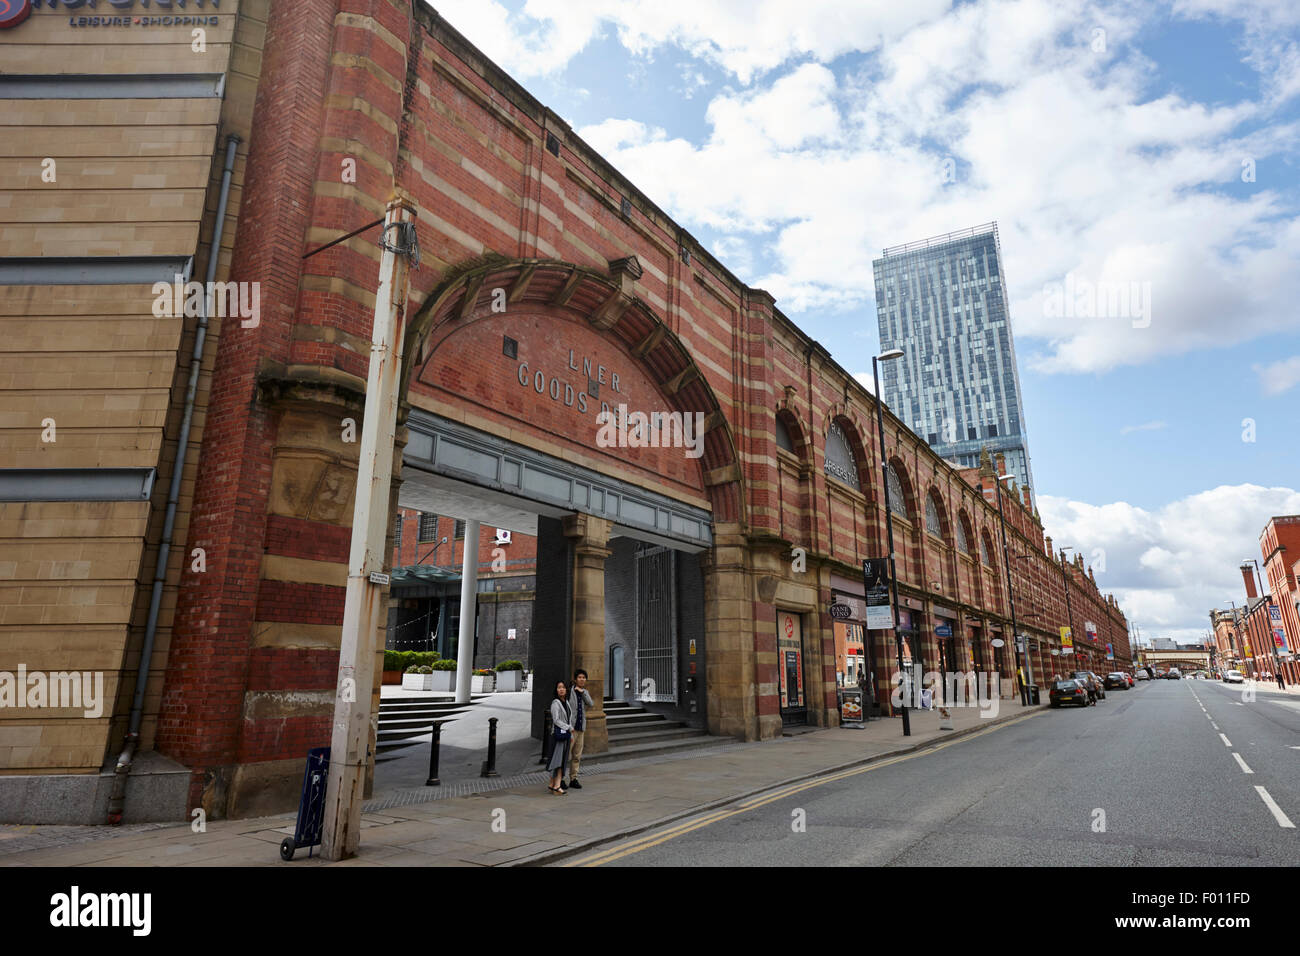 Great Northern leisure and shopping building on Deansgate Manchester England UK Stock Photo